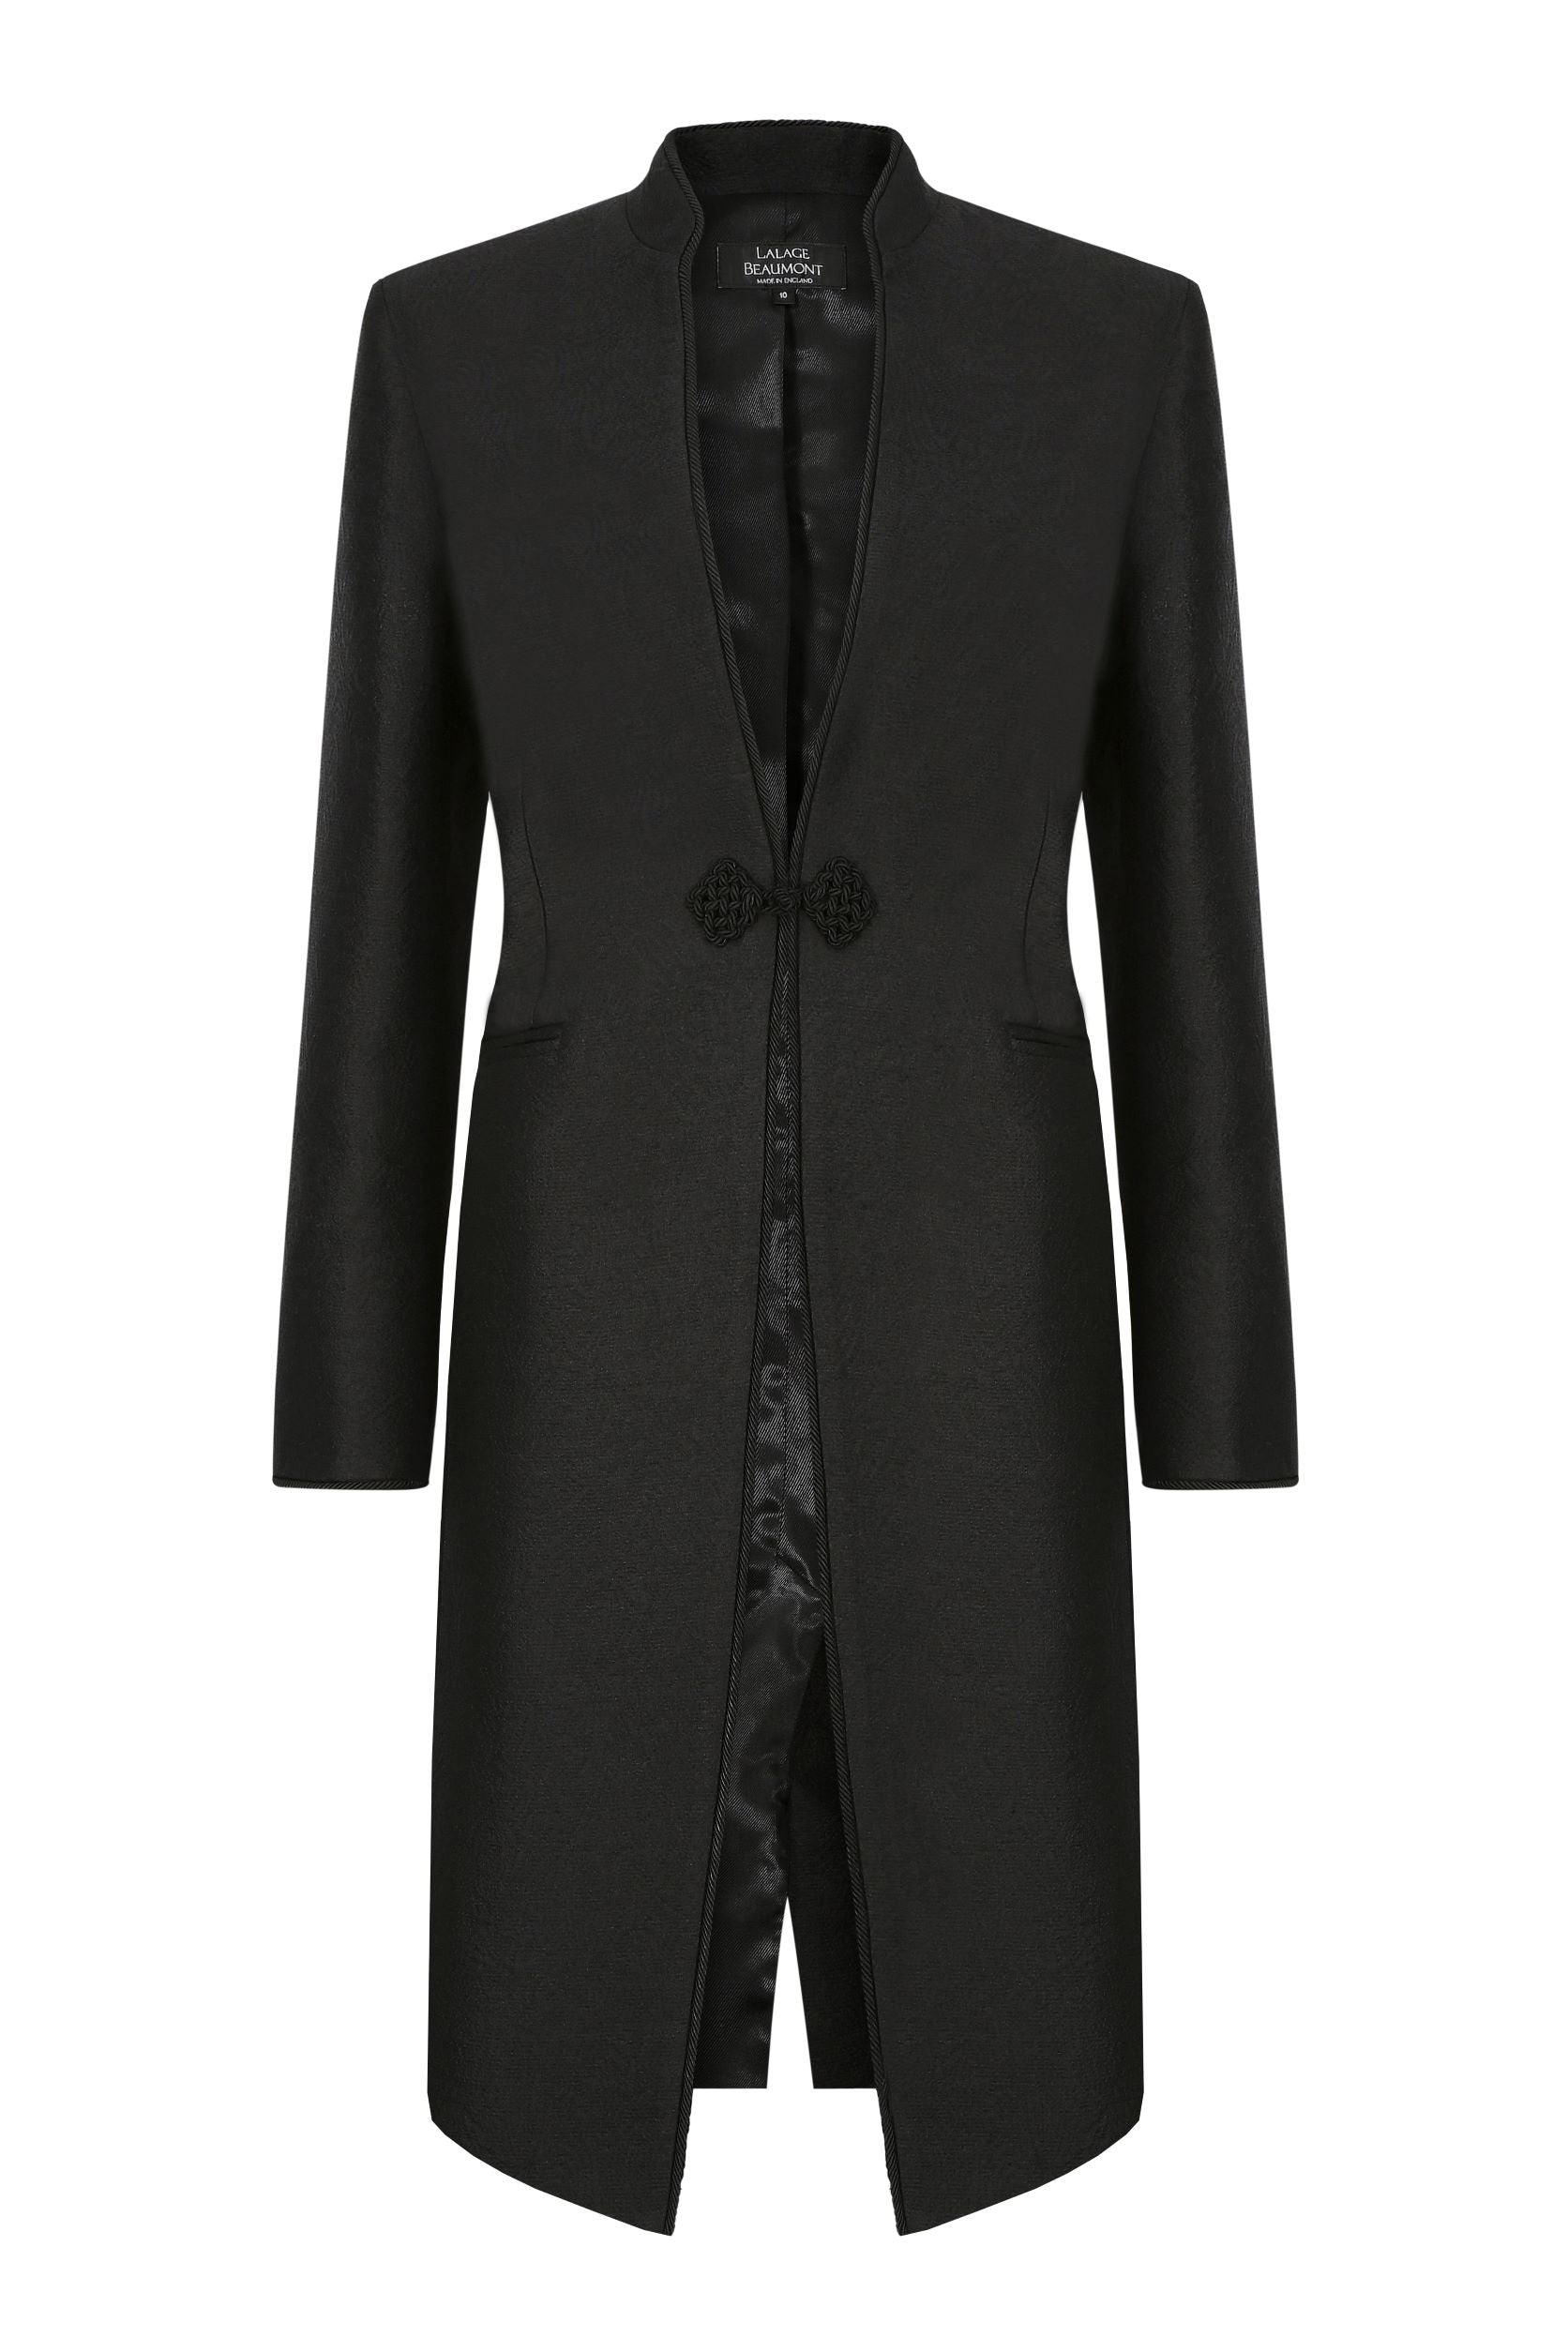 Black Dress Coat in Summer Brocade with Cord Trim and Frogging - Vicky